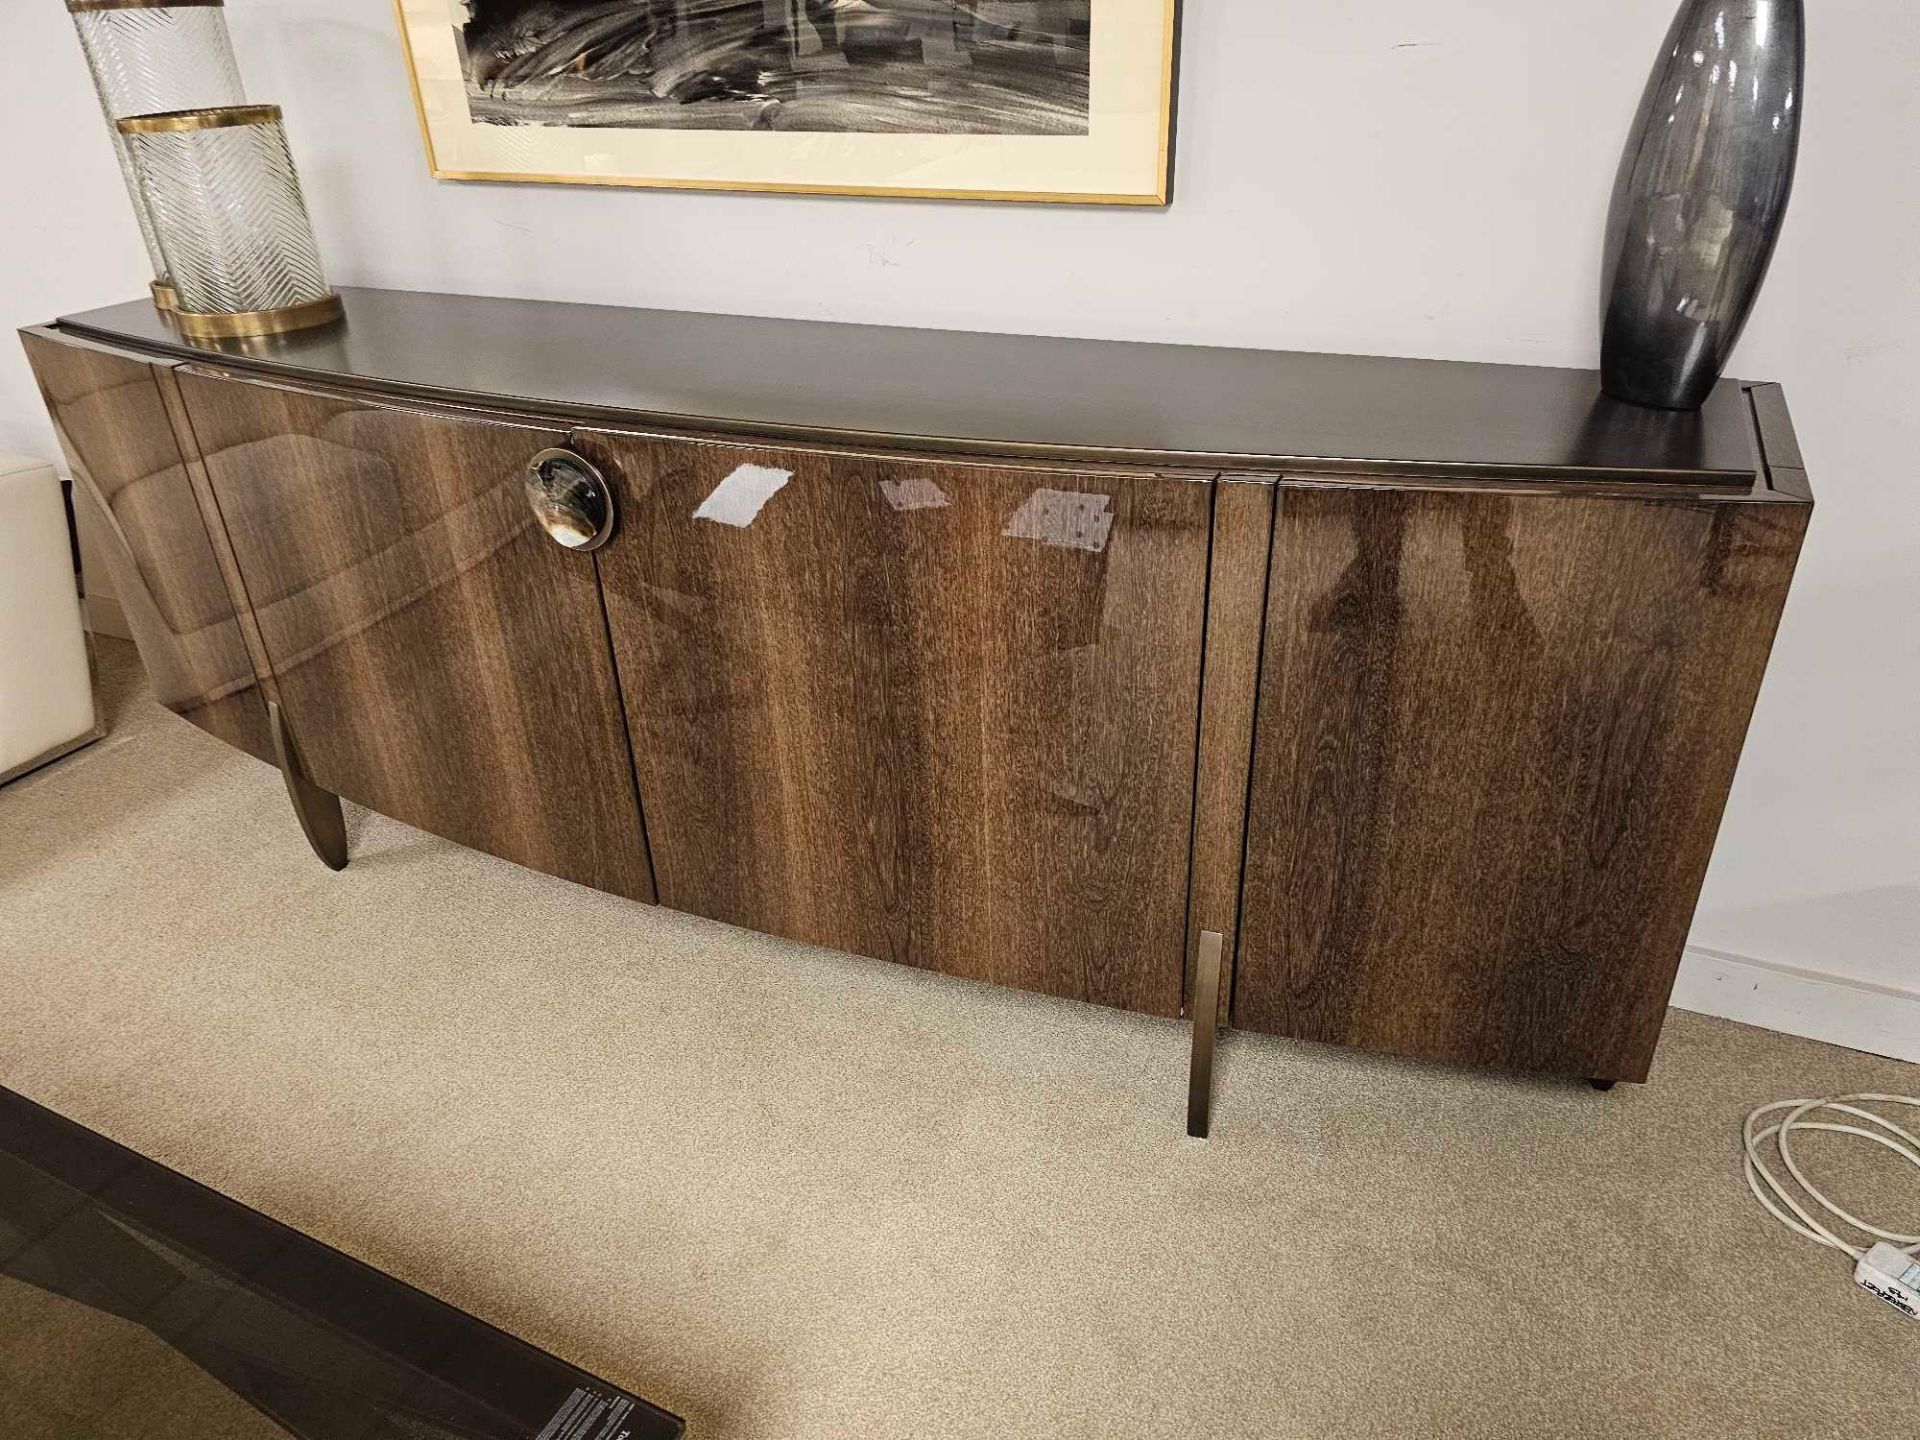 Fashion Affair Large Sideboard by Telemaco for Malerba The Buffet, for the living room, is shaped by - Image 18 of 25